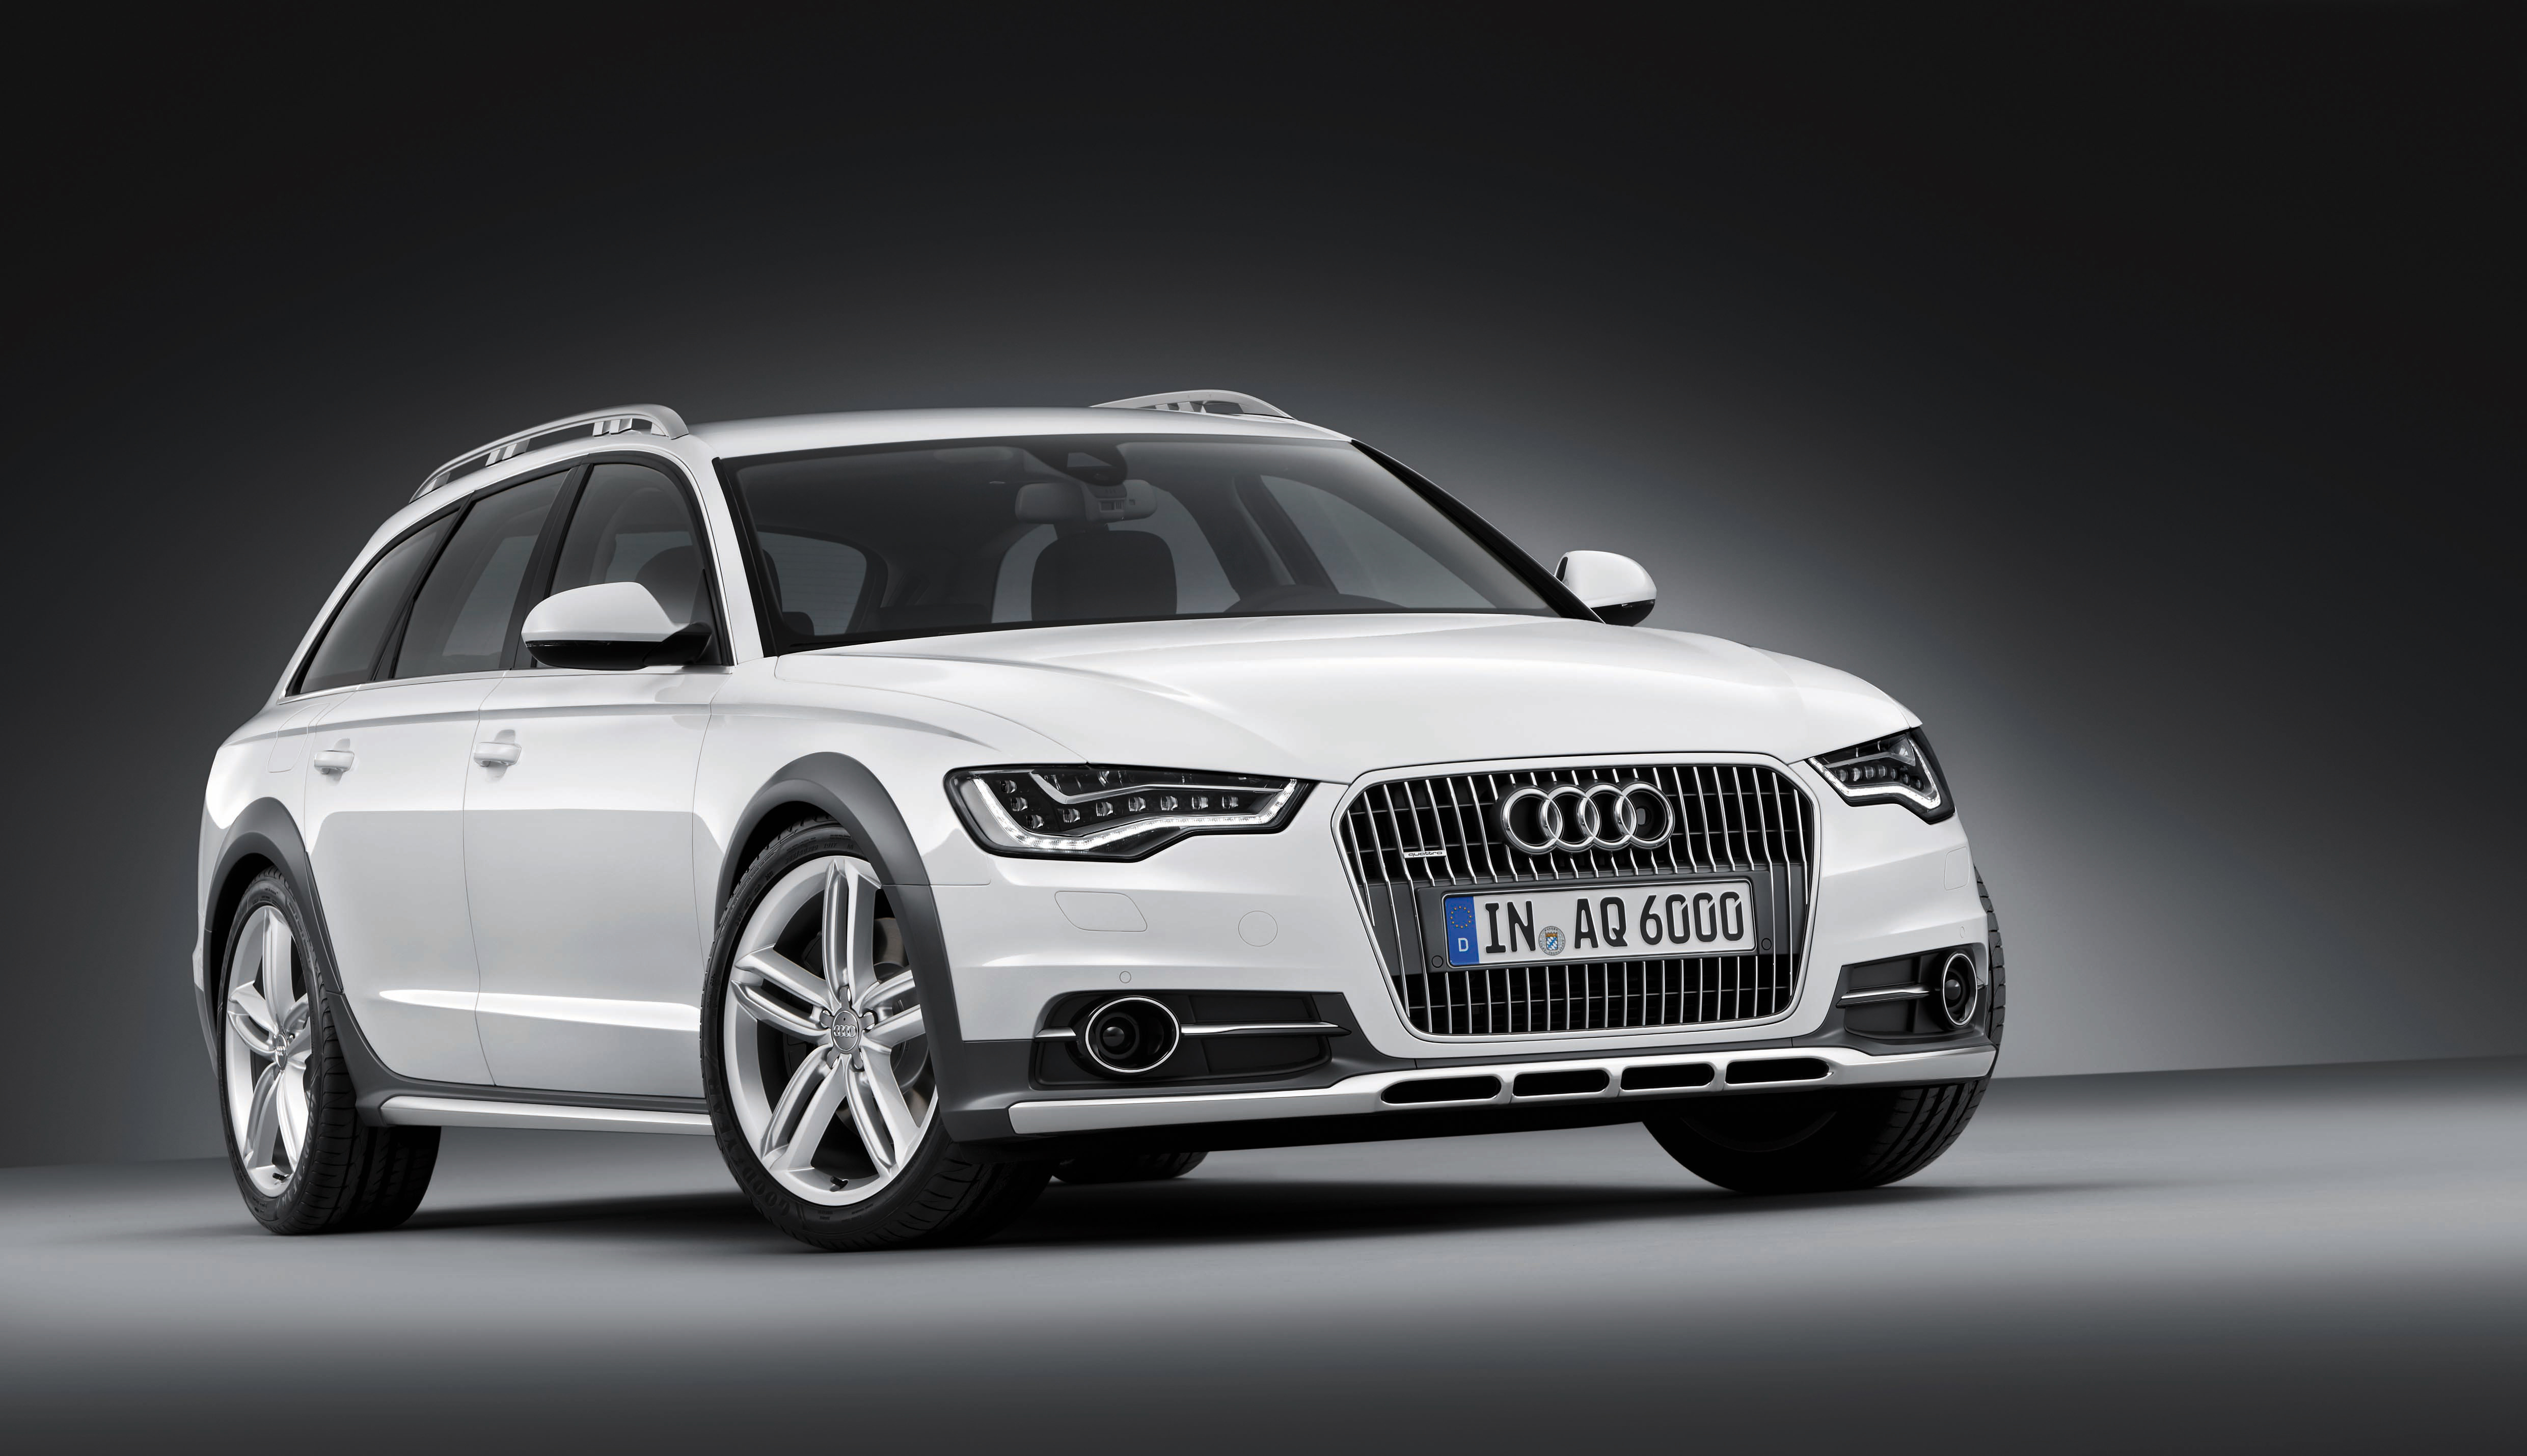 The New Audi A6 allroad – Perfect Photographers Wagon